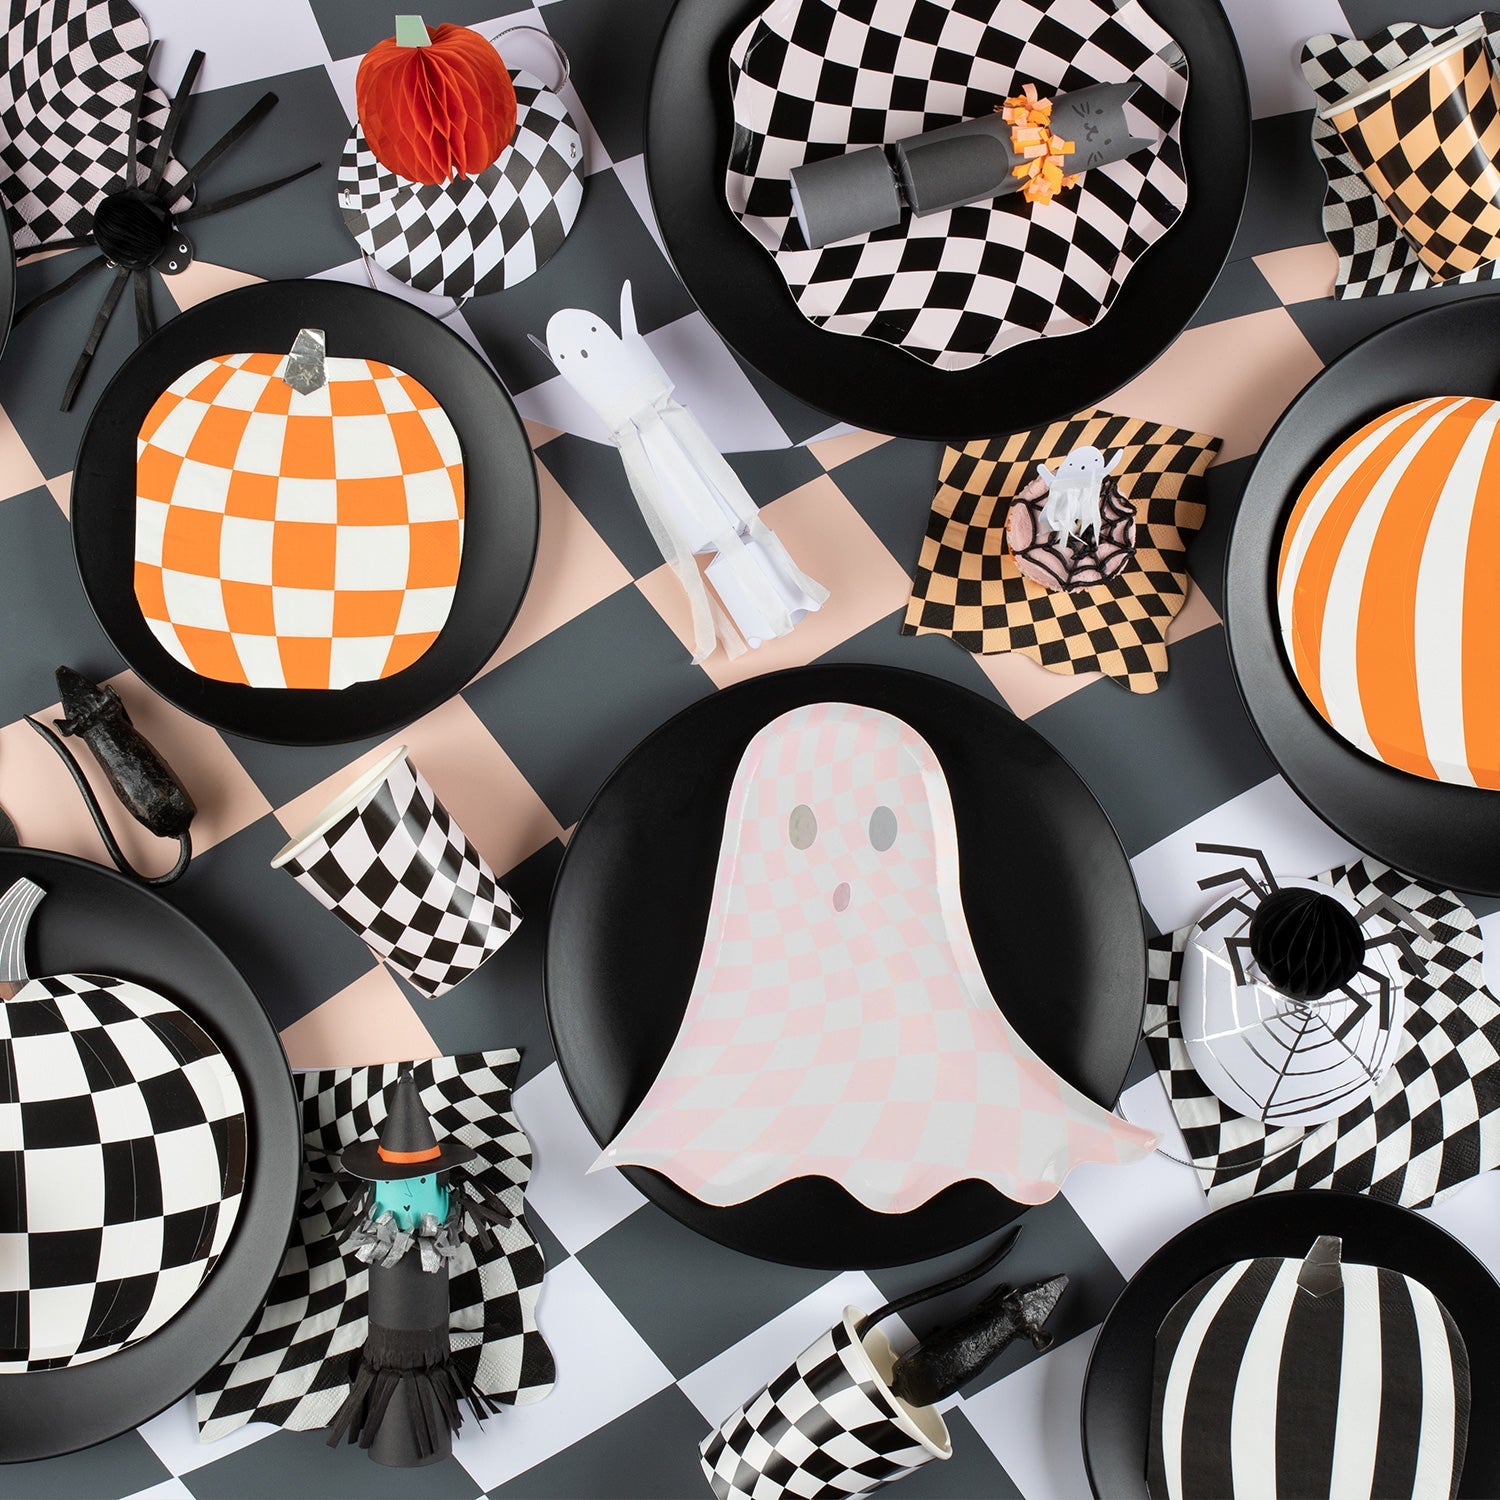 Our party plates, designed to look like pumpkins in retro colors, are perfect as Halloween table decorations.